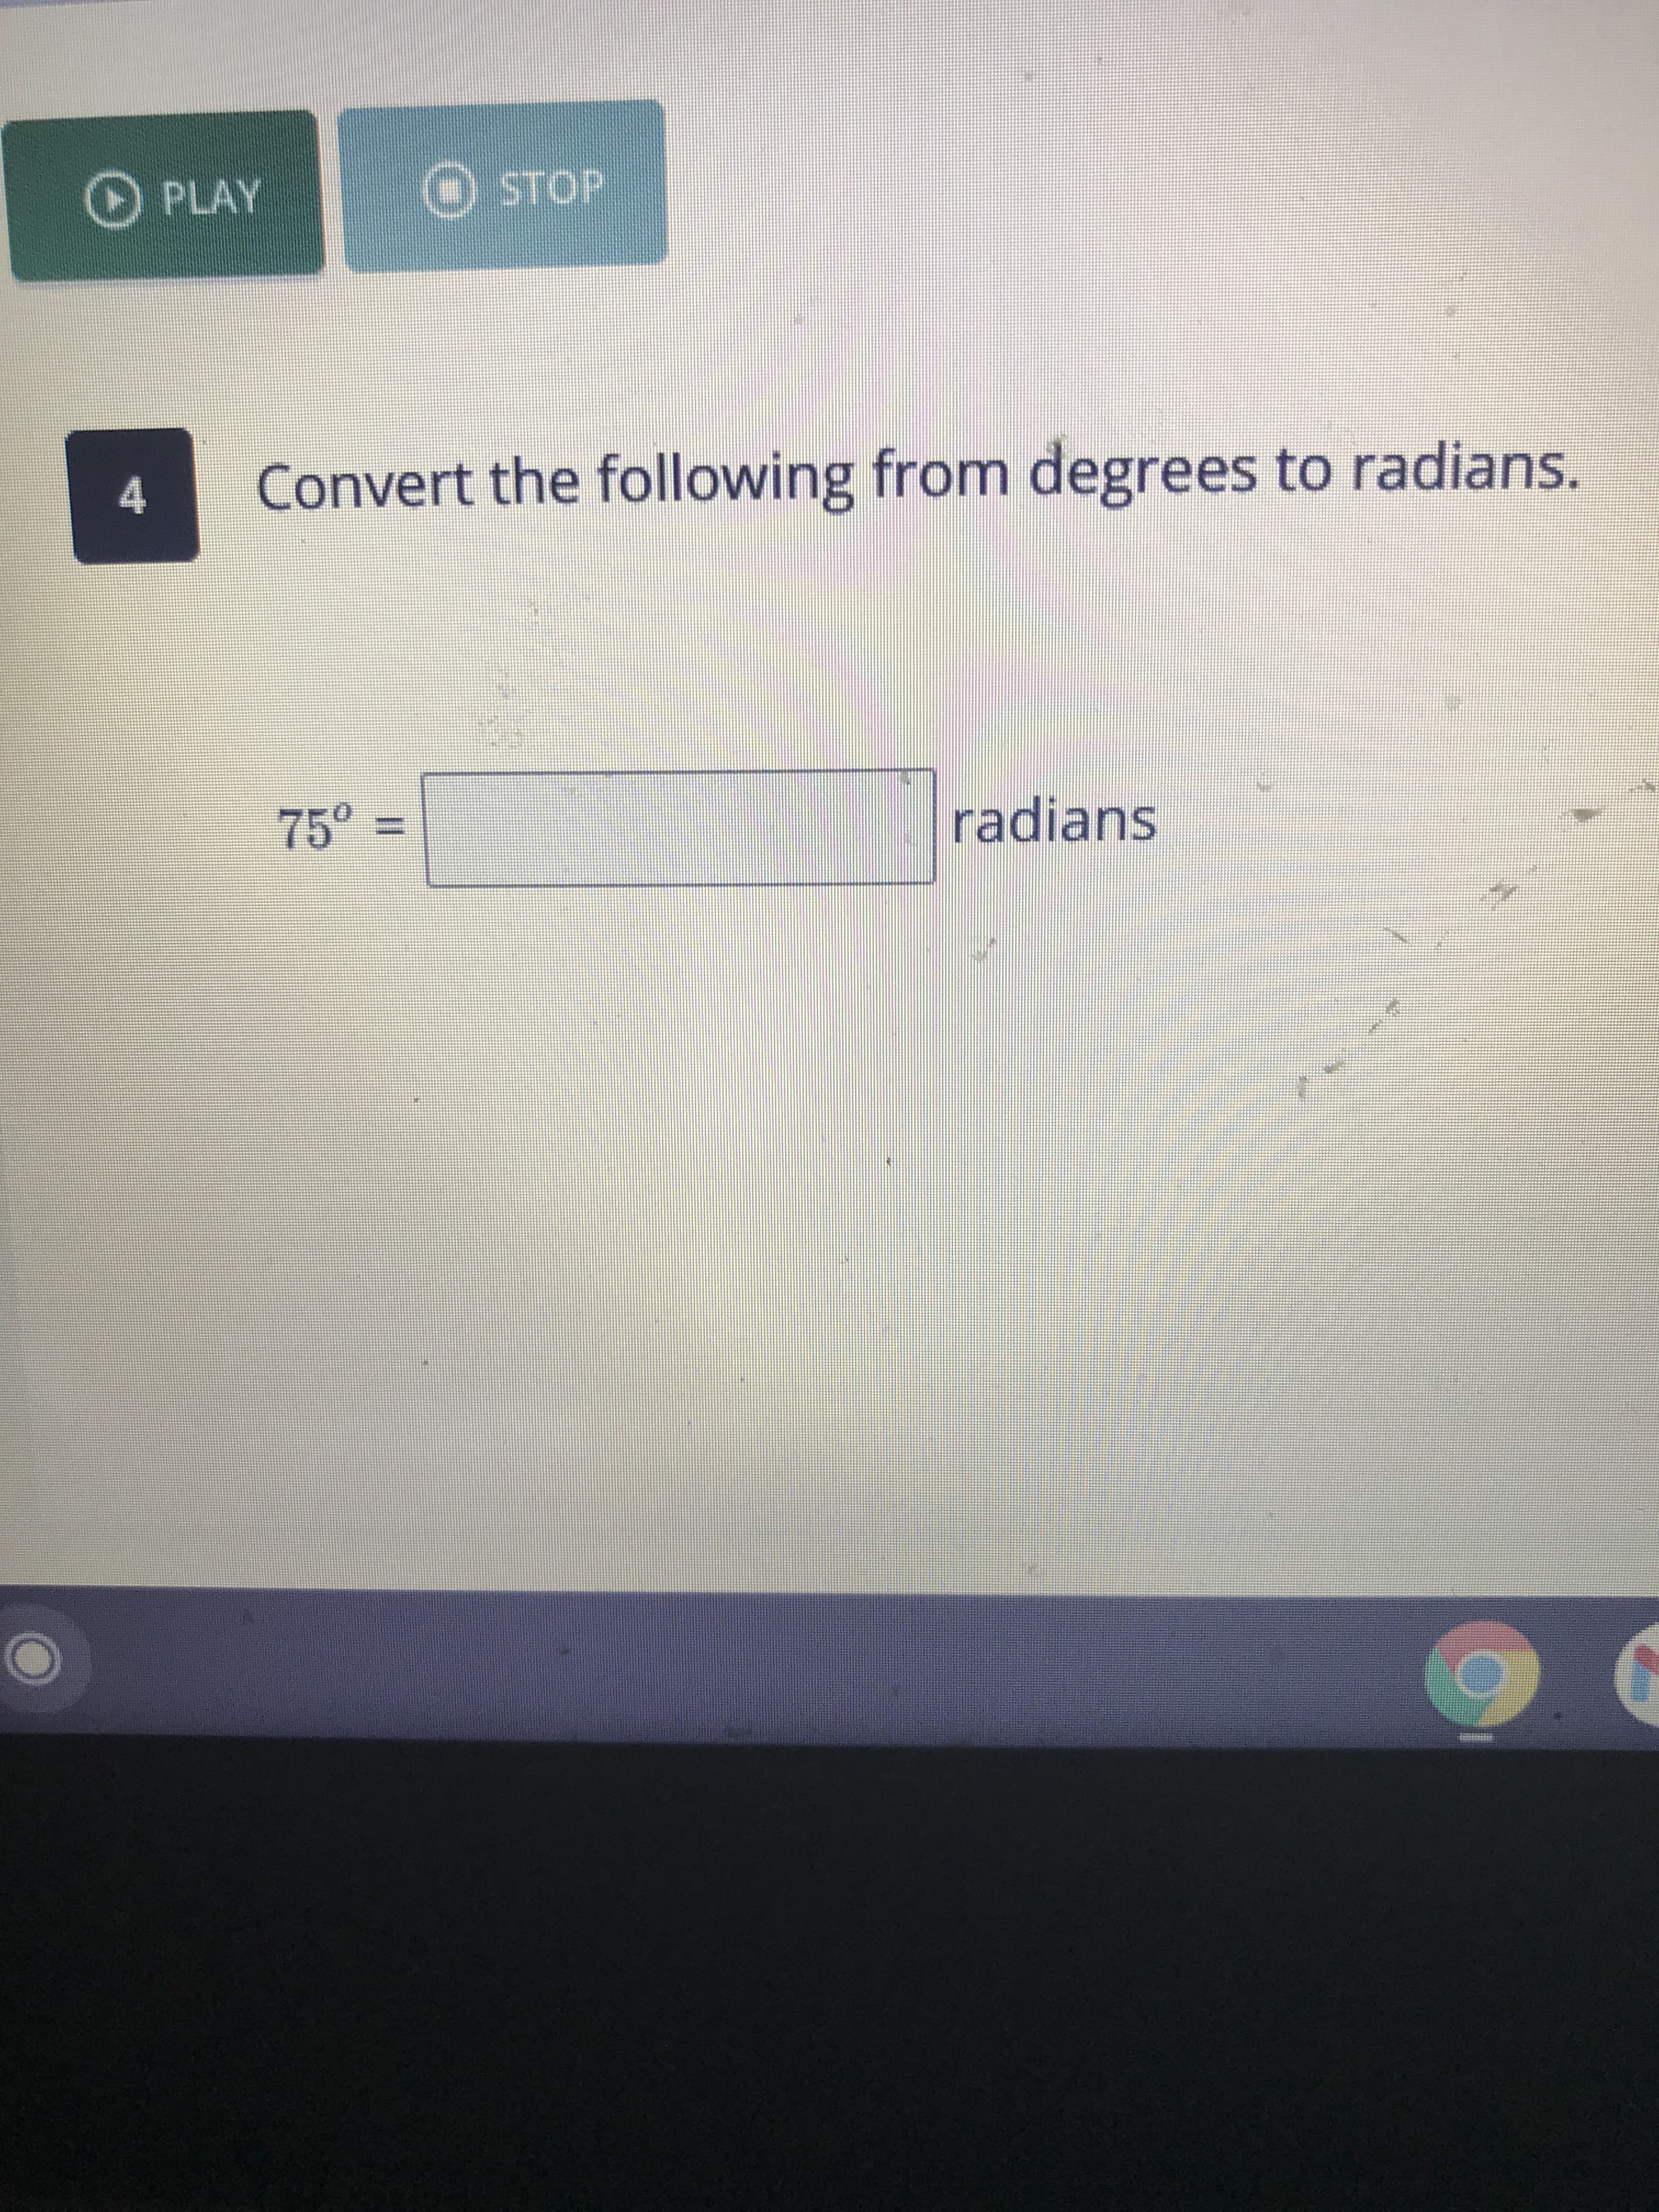 Convert the following from degrees to radians.
